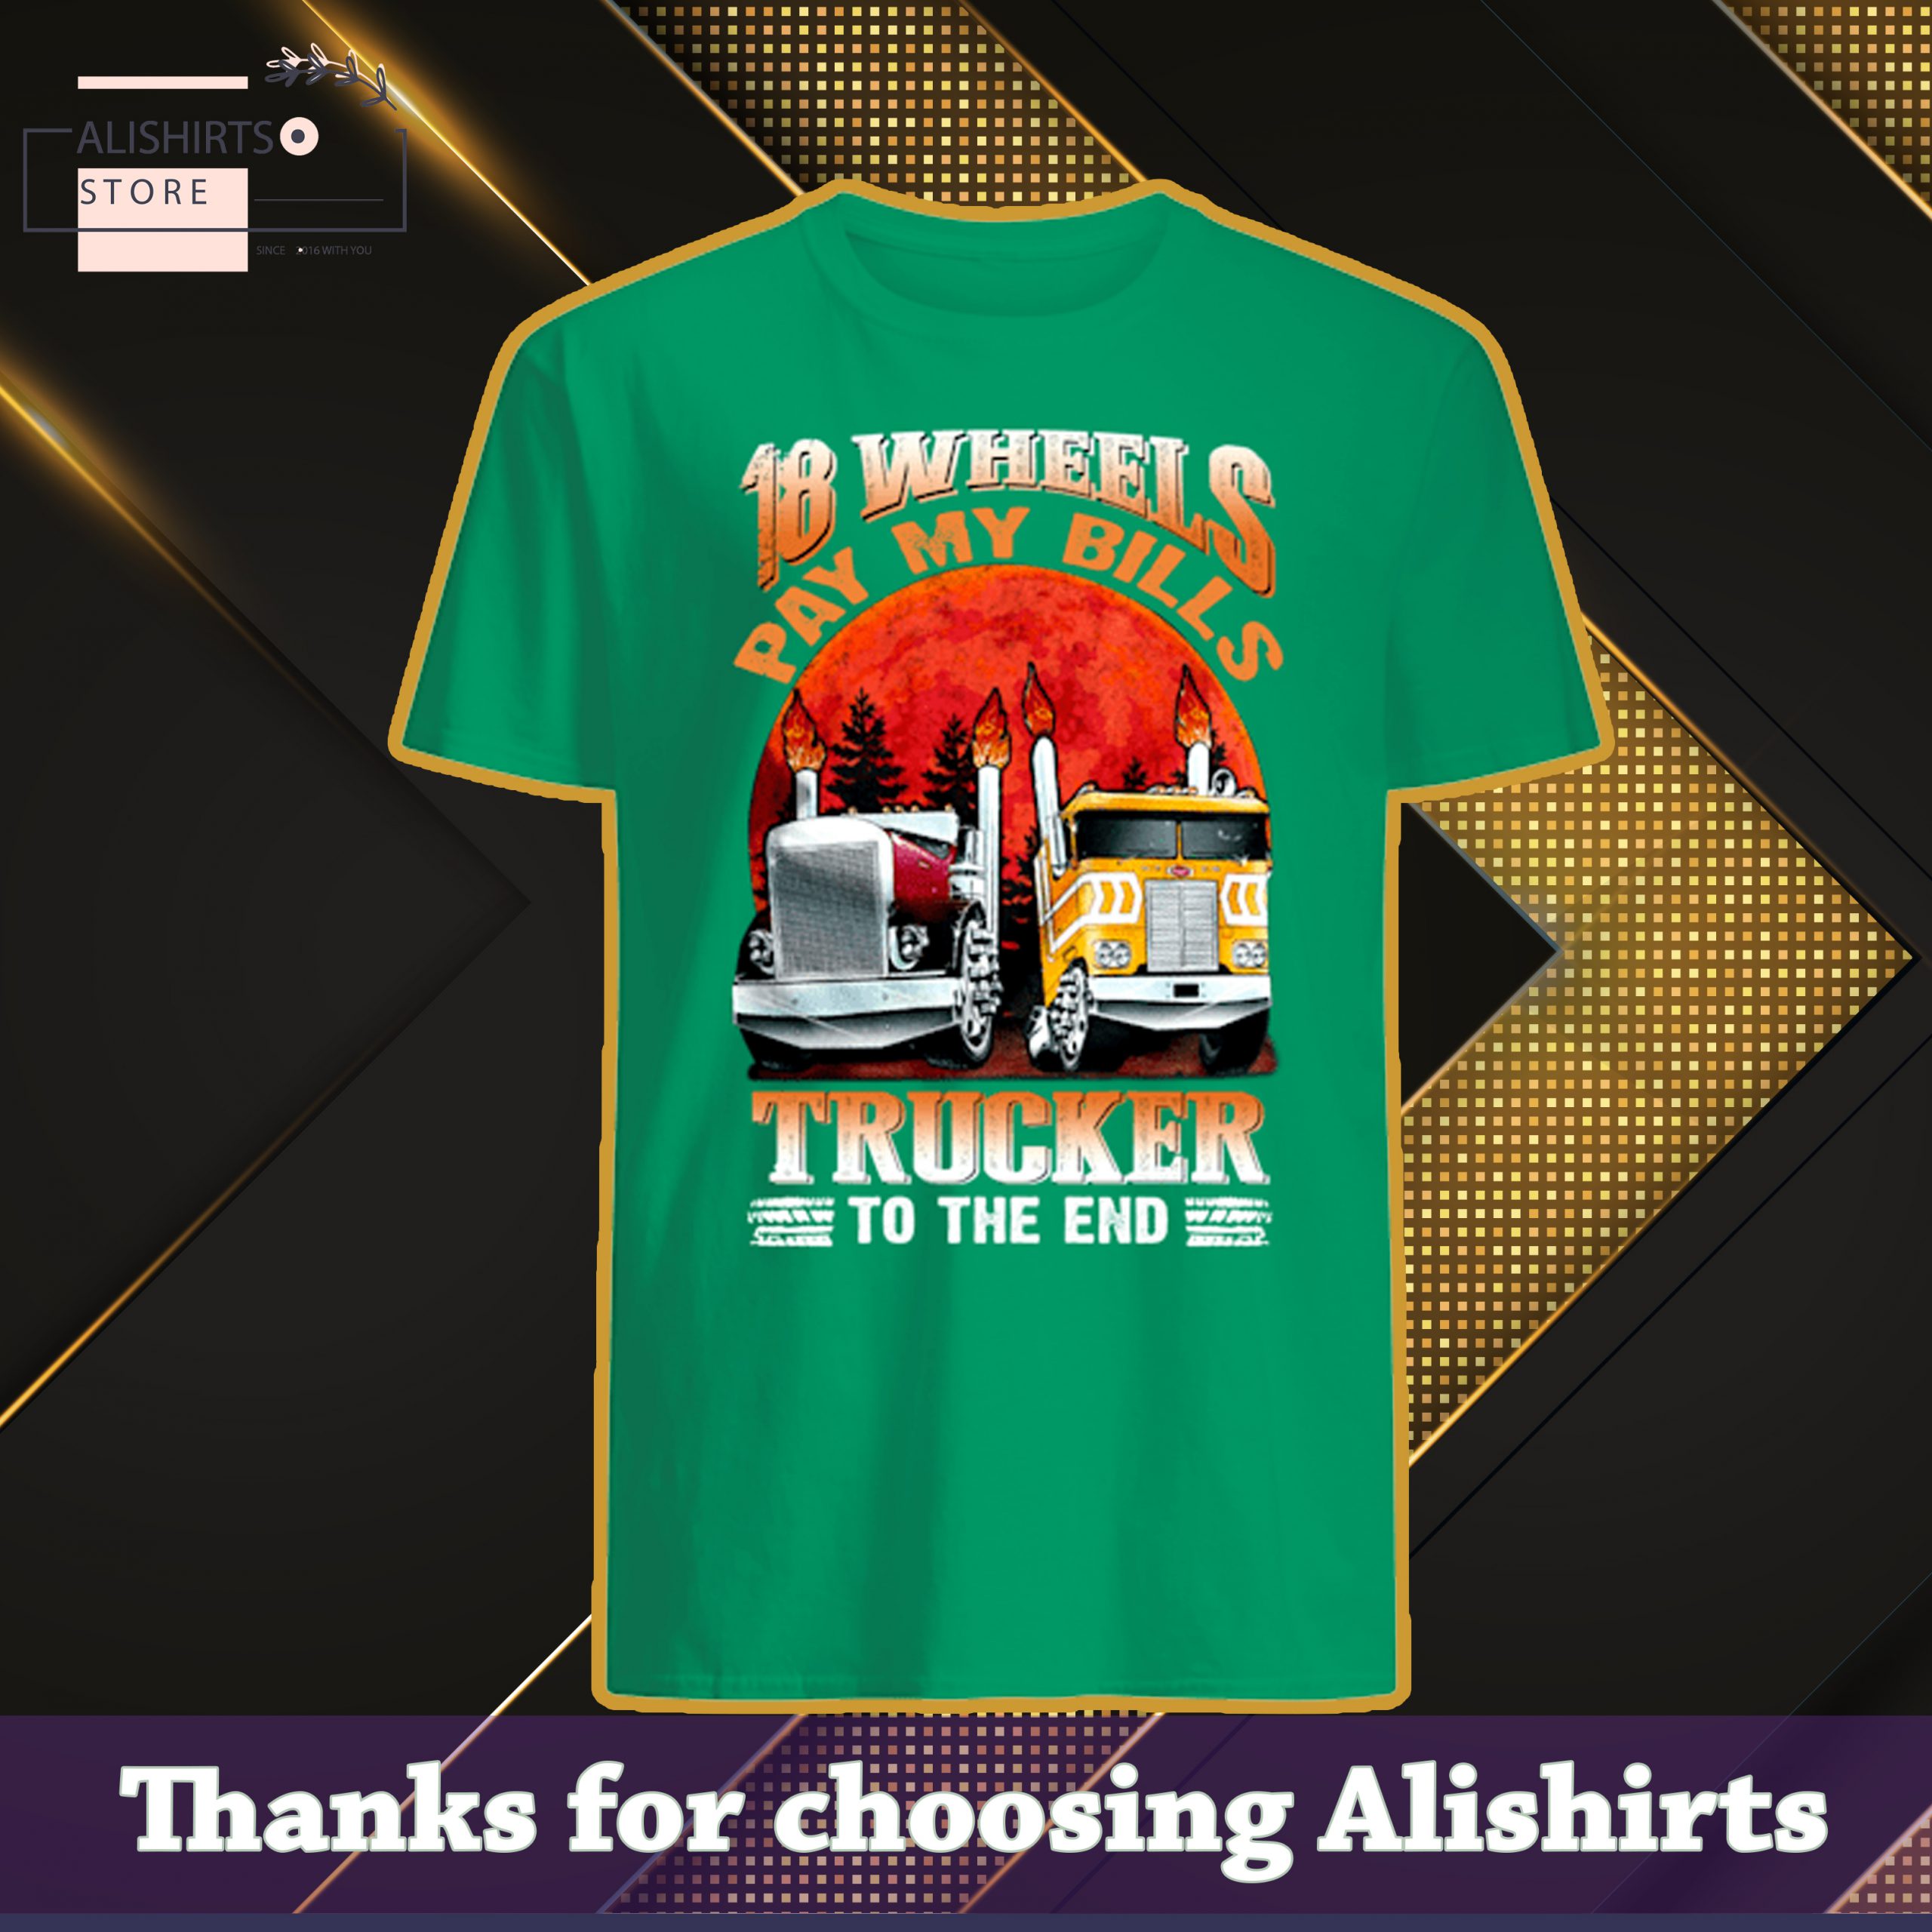 18 wheels pay for bills trucker to the end shirt